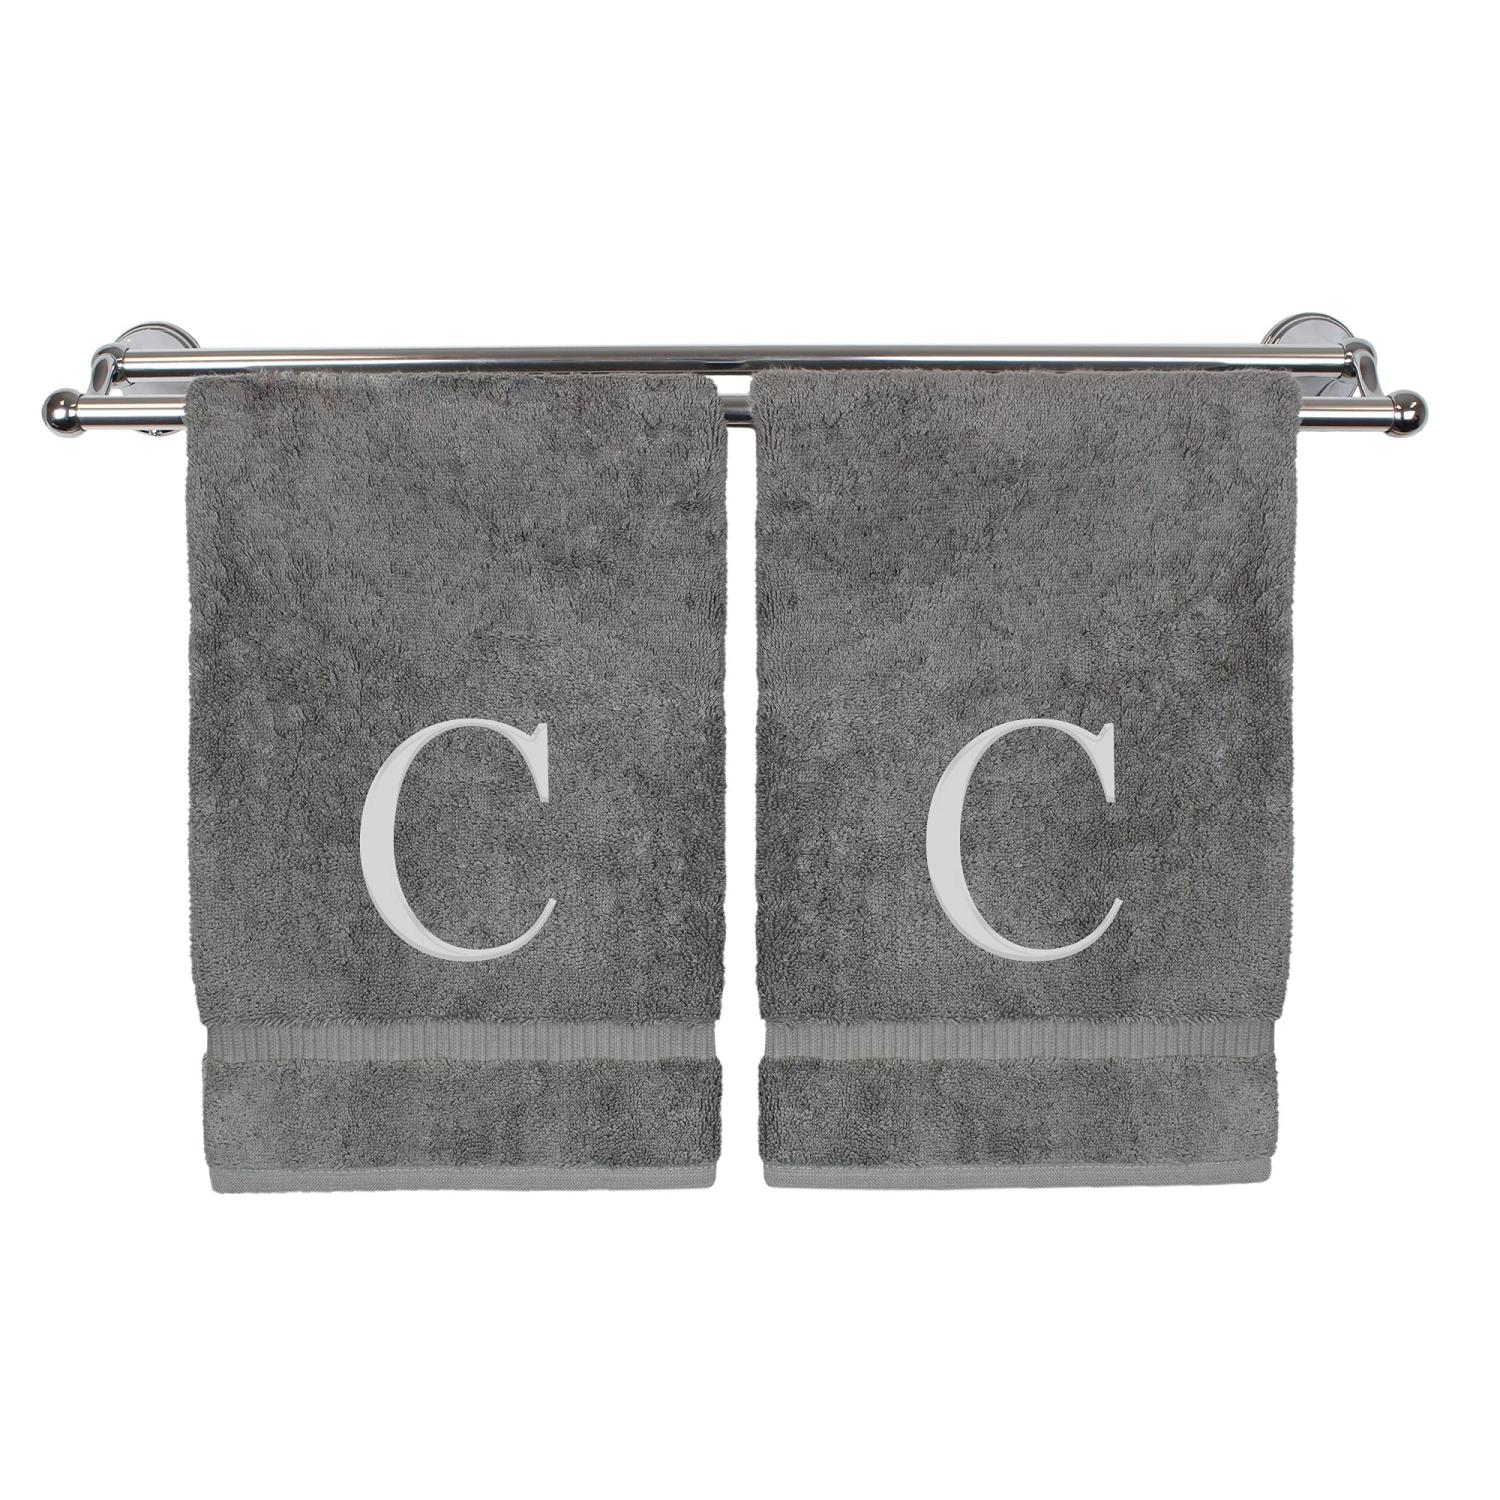 Personalized White Hand Towels With Monogram / Monogrammed